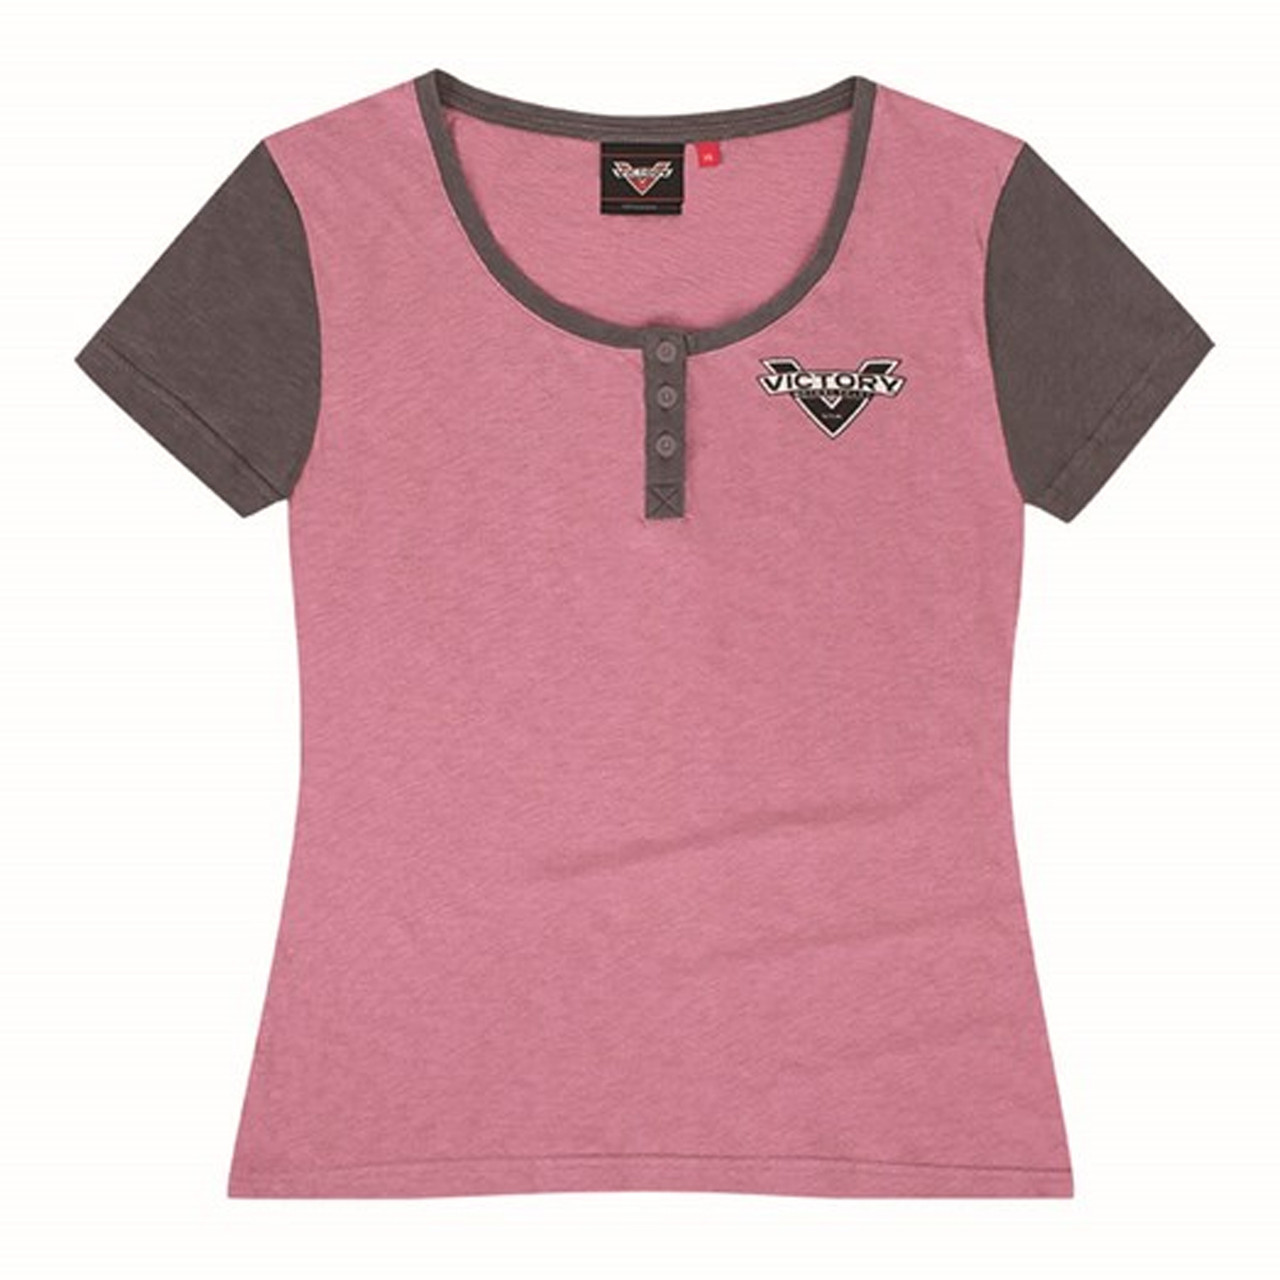 Victory Motorcycle New OEM Women's Pink Henley Tee Shirt, Small, 286799002